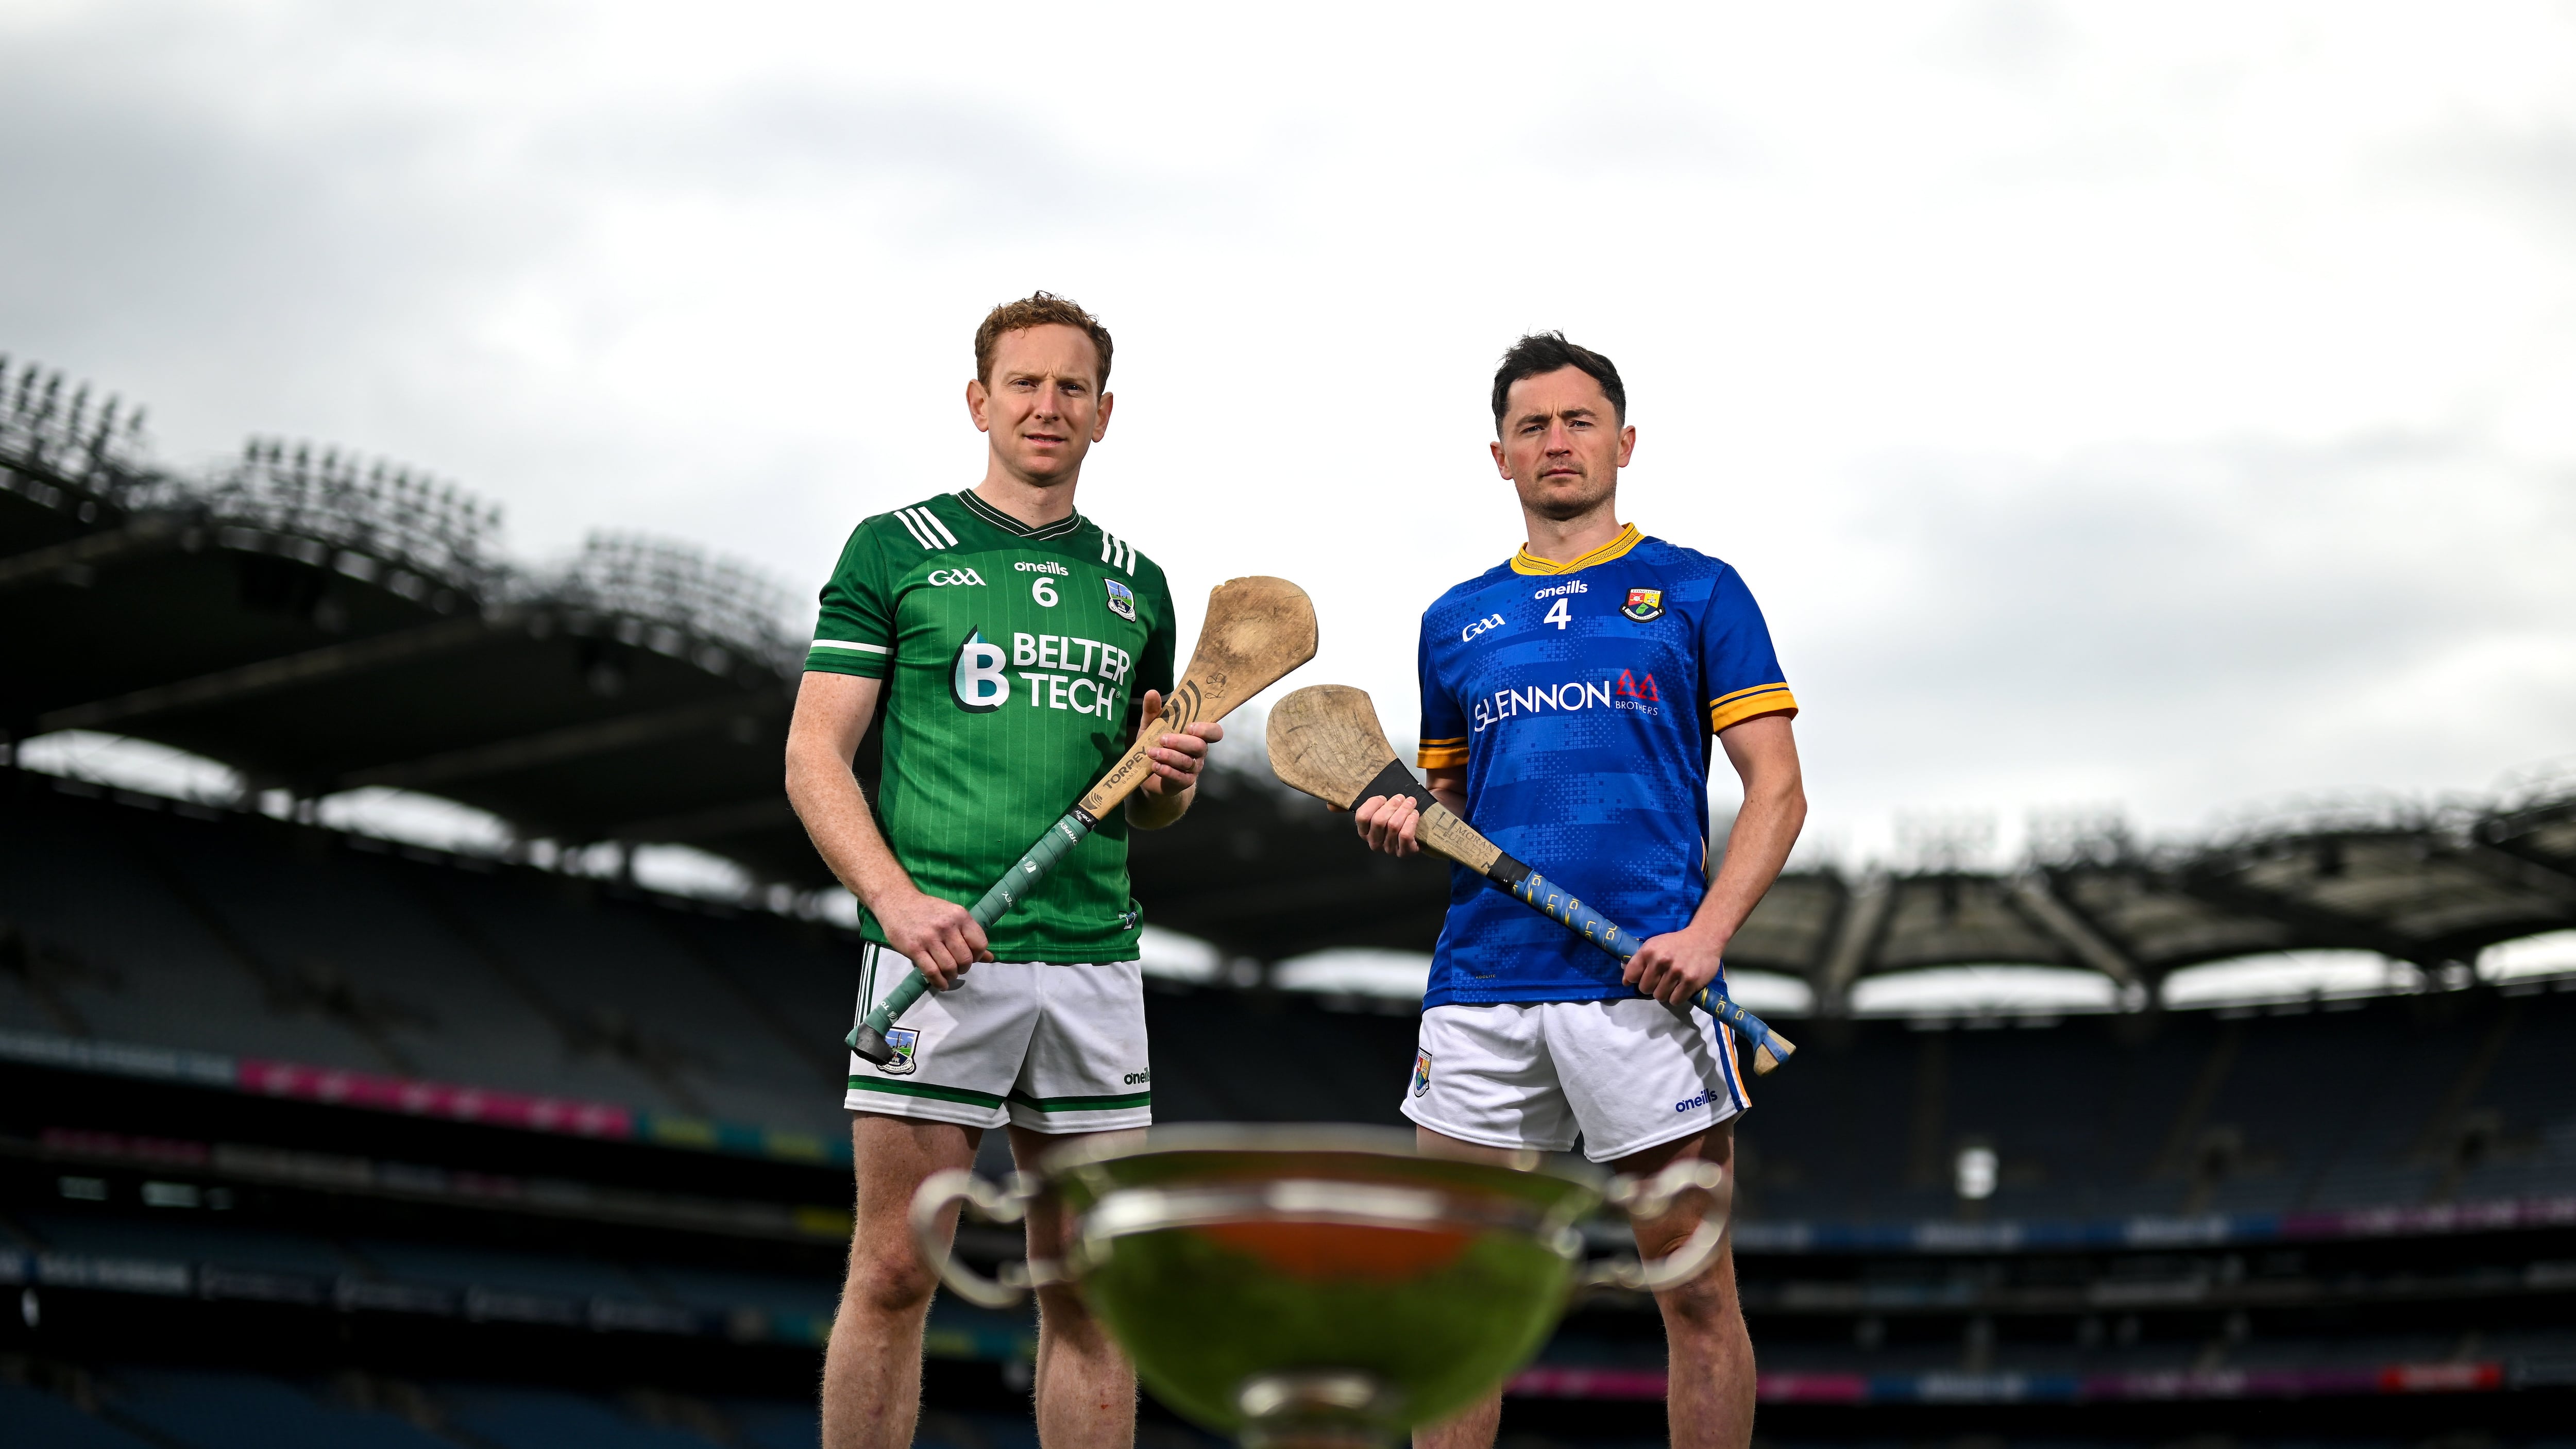 Fermanagh's Ryan Bogue and Longford's John Casey during a Joe McDonagh, Christy Ring, Nickey Rackard, Lory Meagher Cup Final media day at Croke Park in Dublin30 May 2024; Lory Meagher Cup finalists Fermanagh's Ryan Bogue and Longford's John Casey during a Joe McDonagh, Christy Ring, Nickey Rackard, Lory Meagher Cup Final media day at Croke Park in Dublin